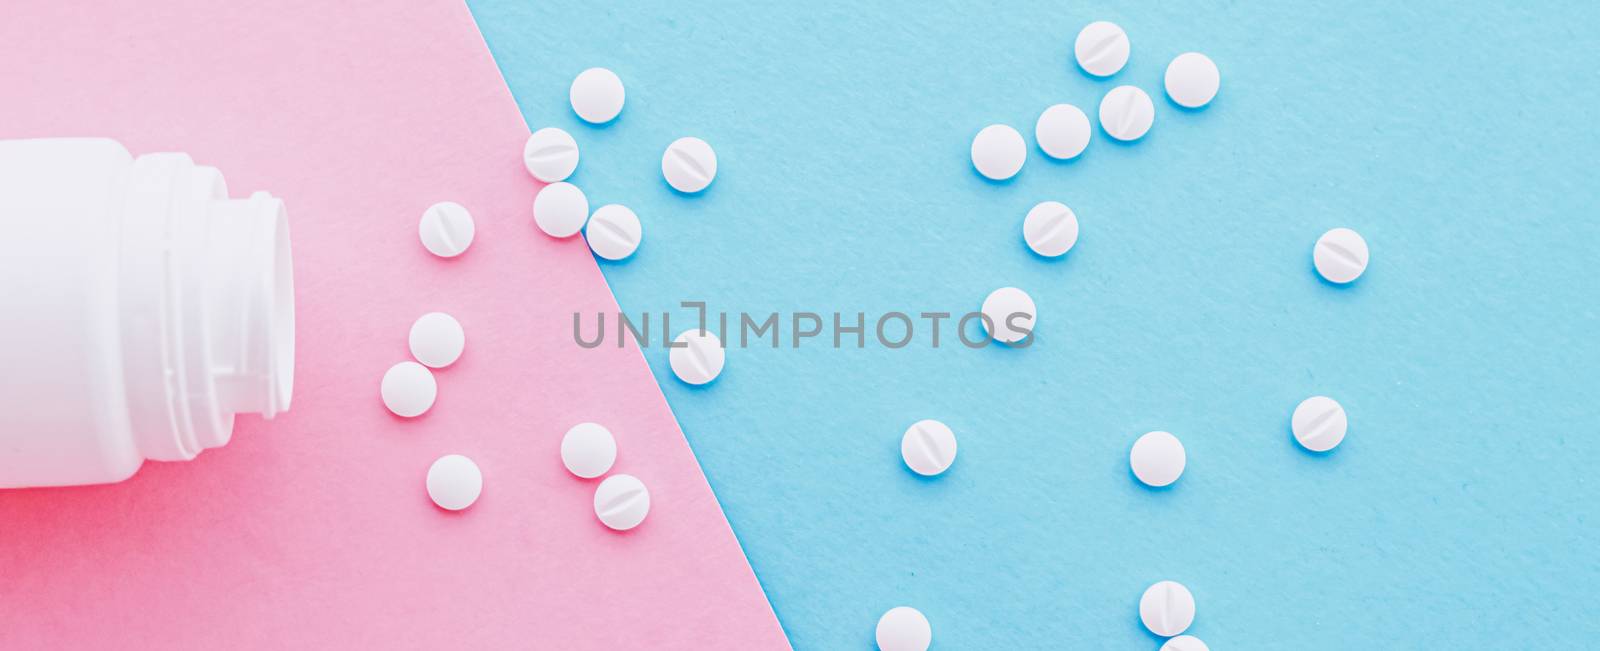 Medical pills and drugs, medicine for health care and clinical therapy